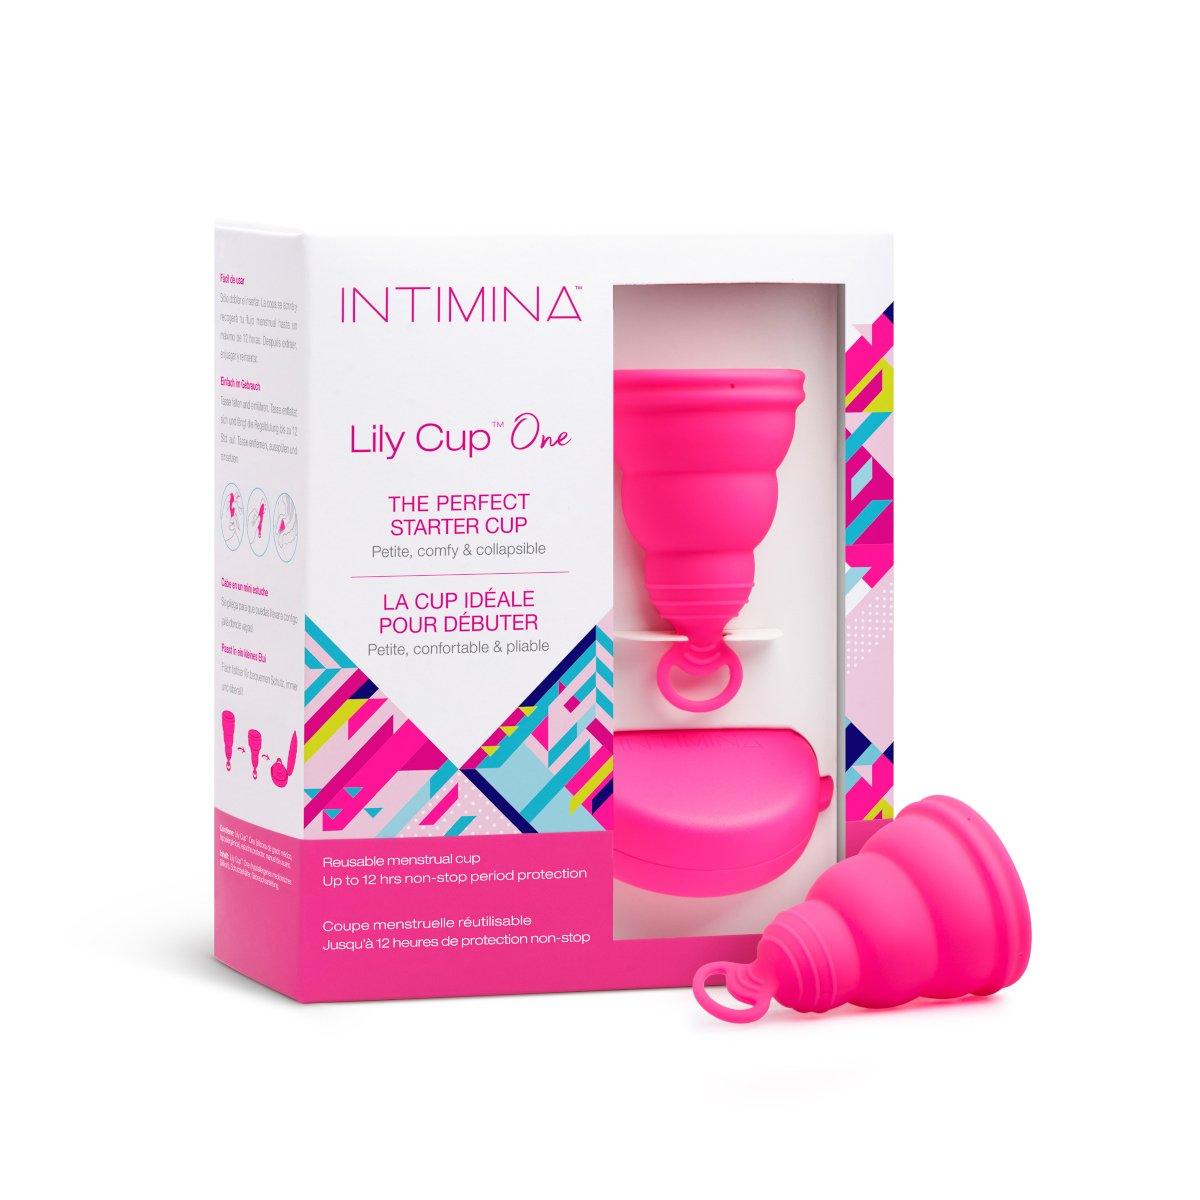 Deep Pink Intimina Lily Cup ONE